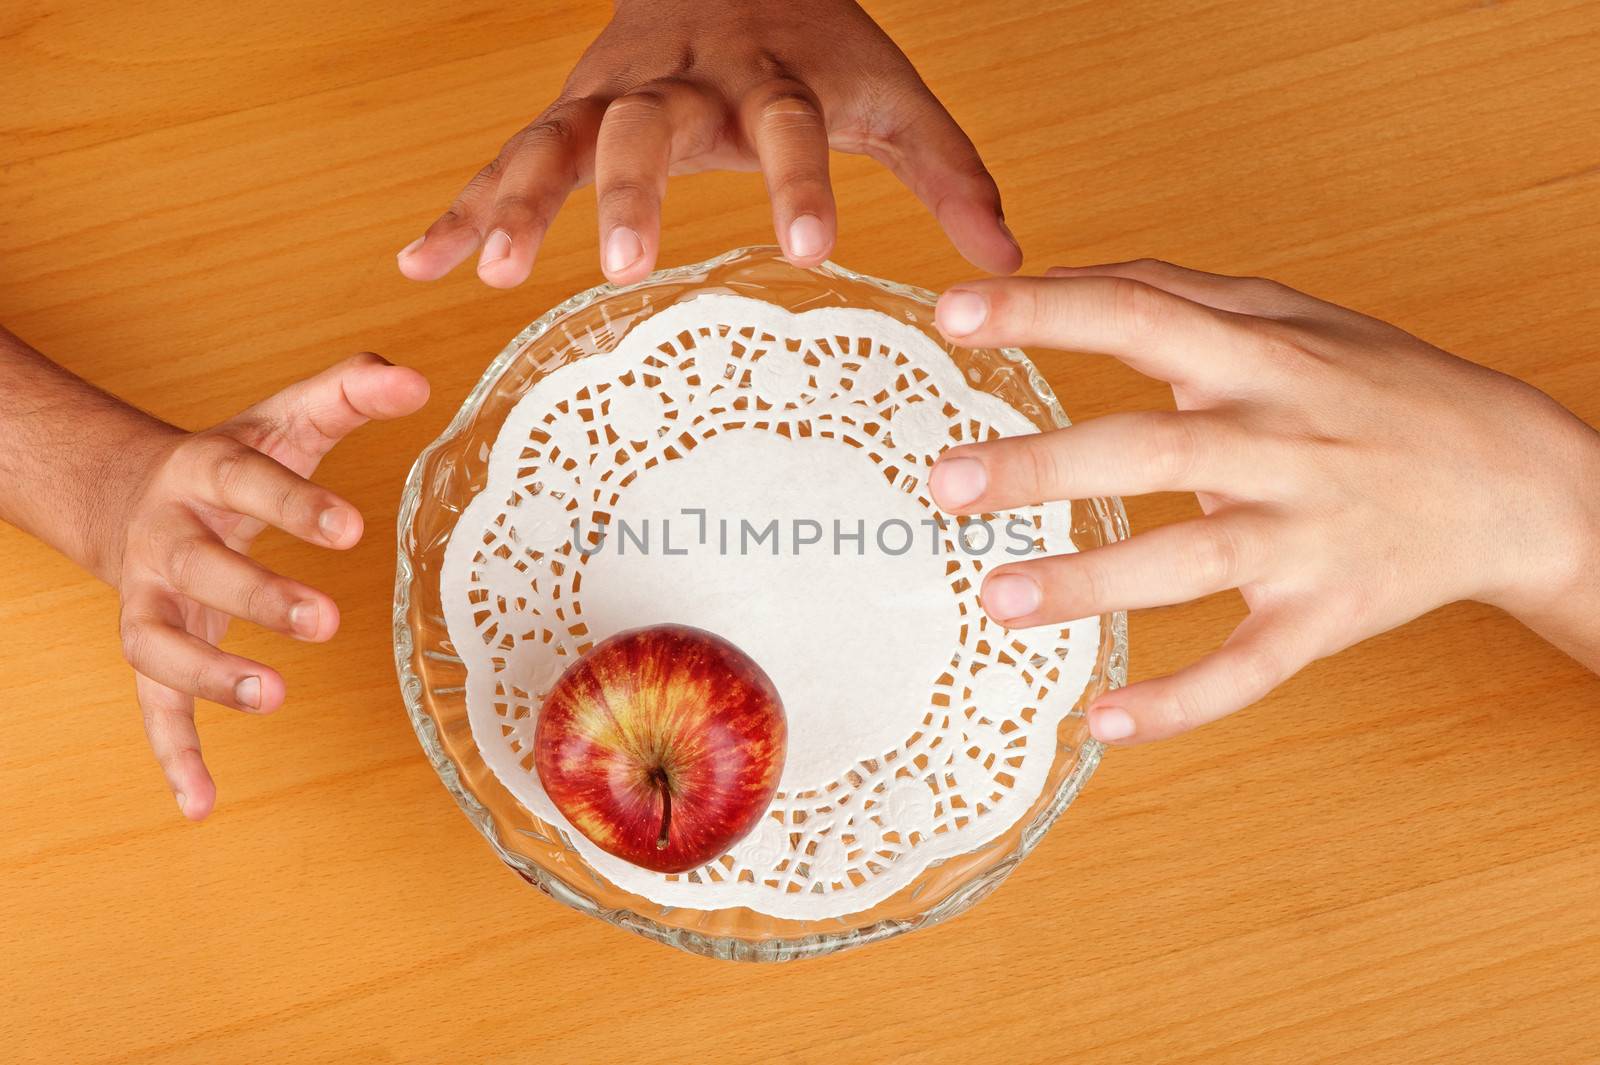 Children hands compete to grab the last apple available in a bowl.